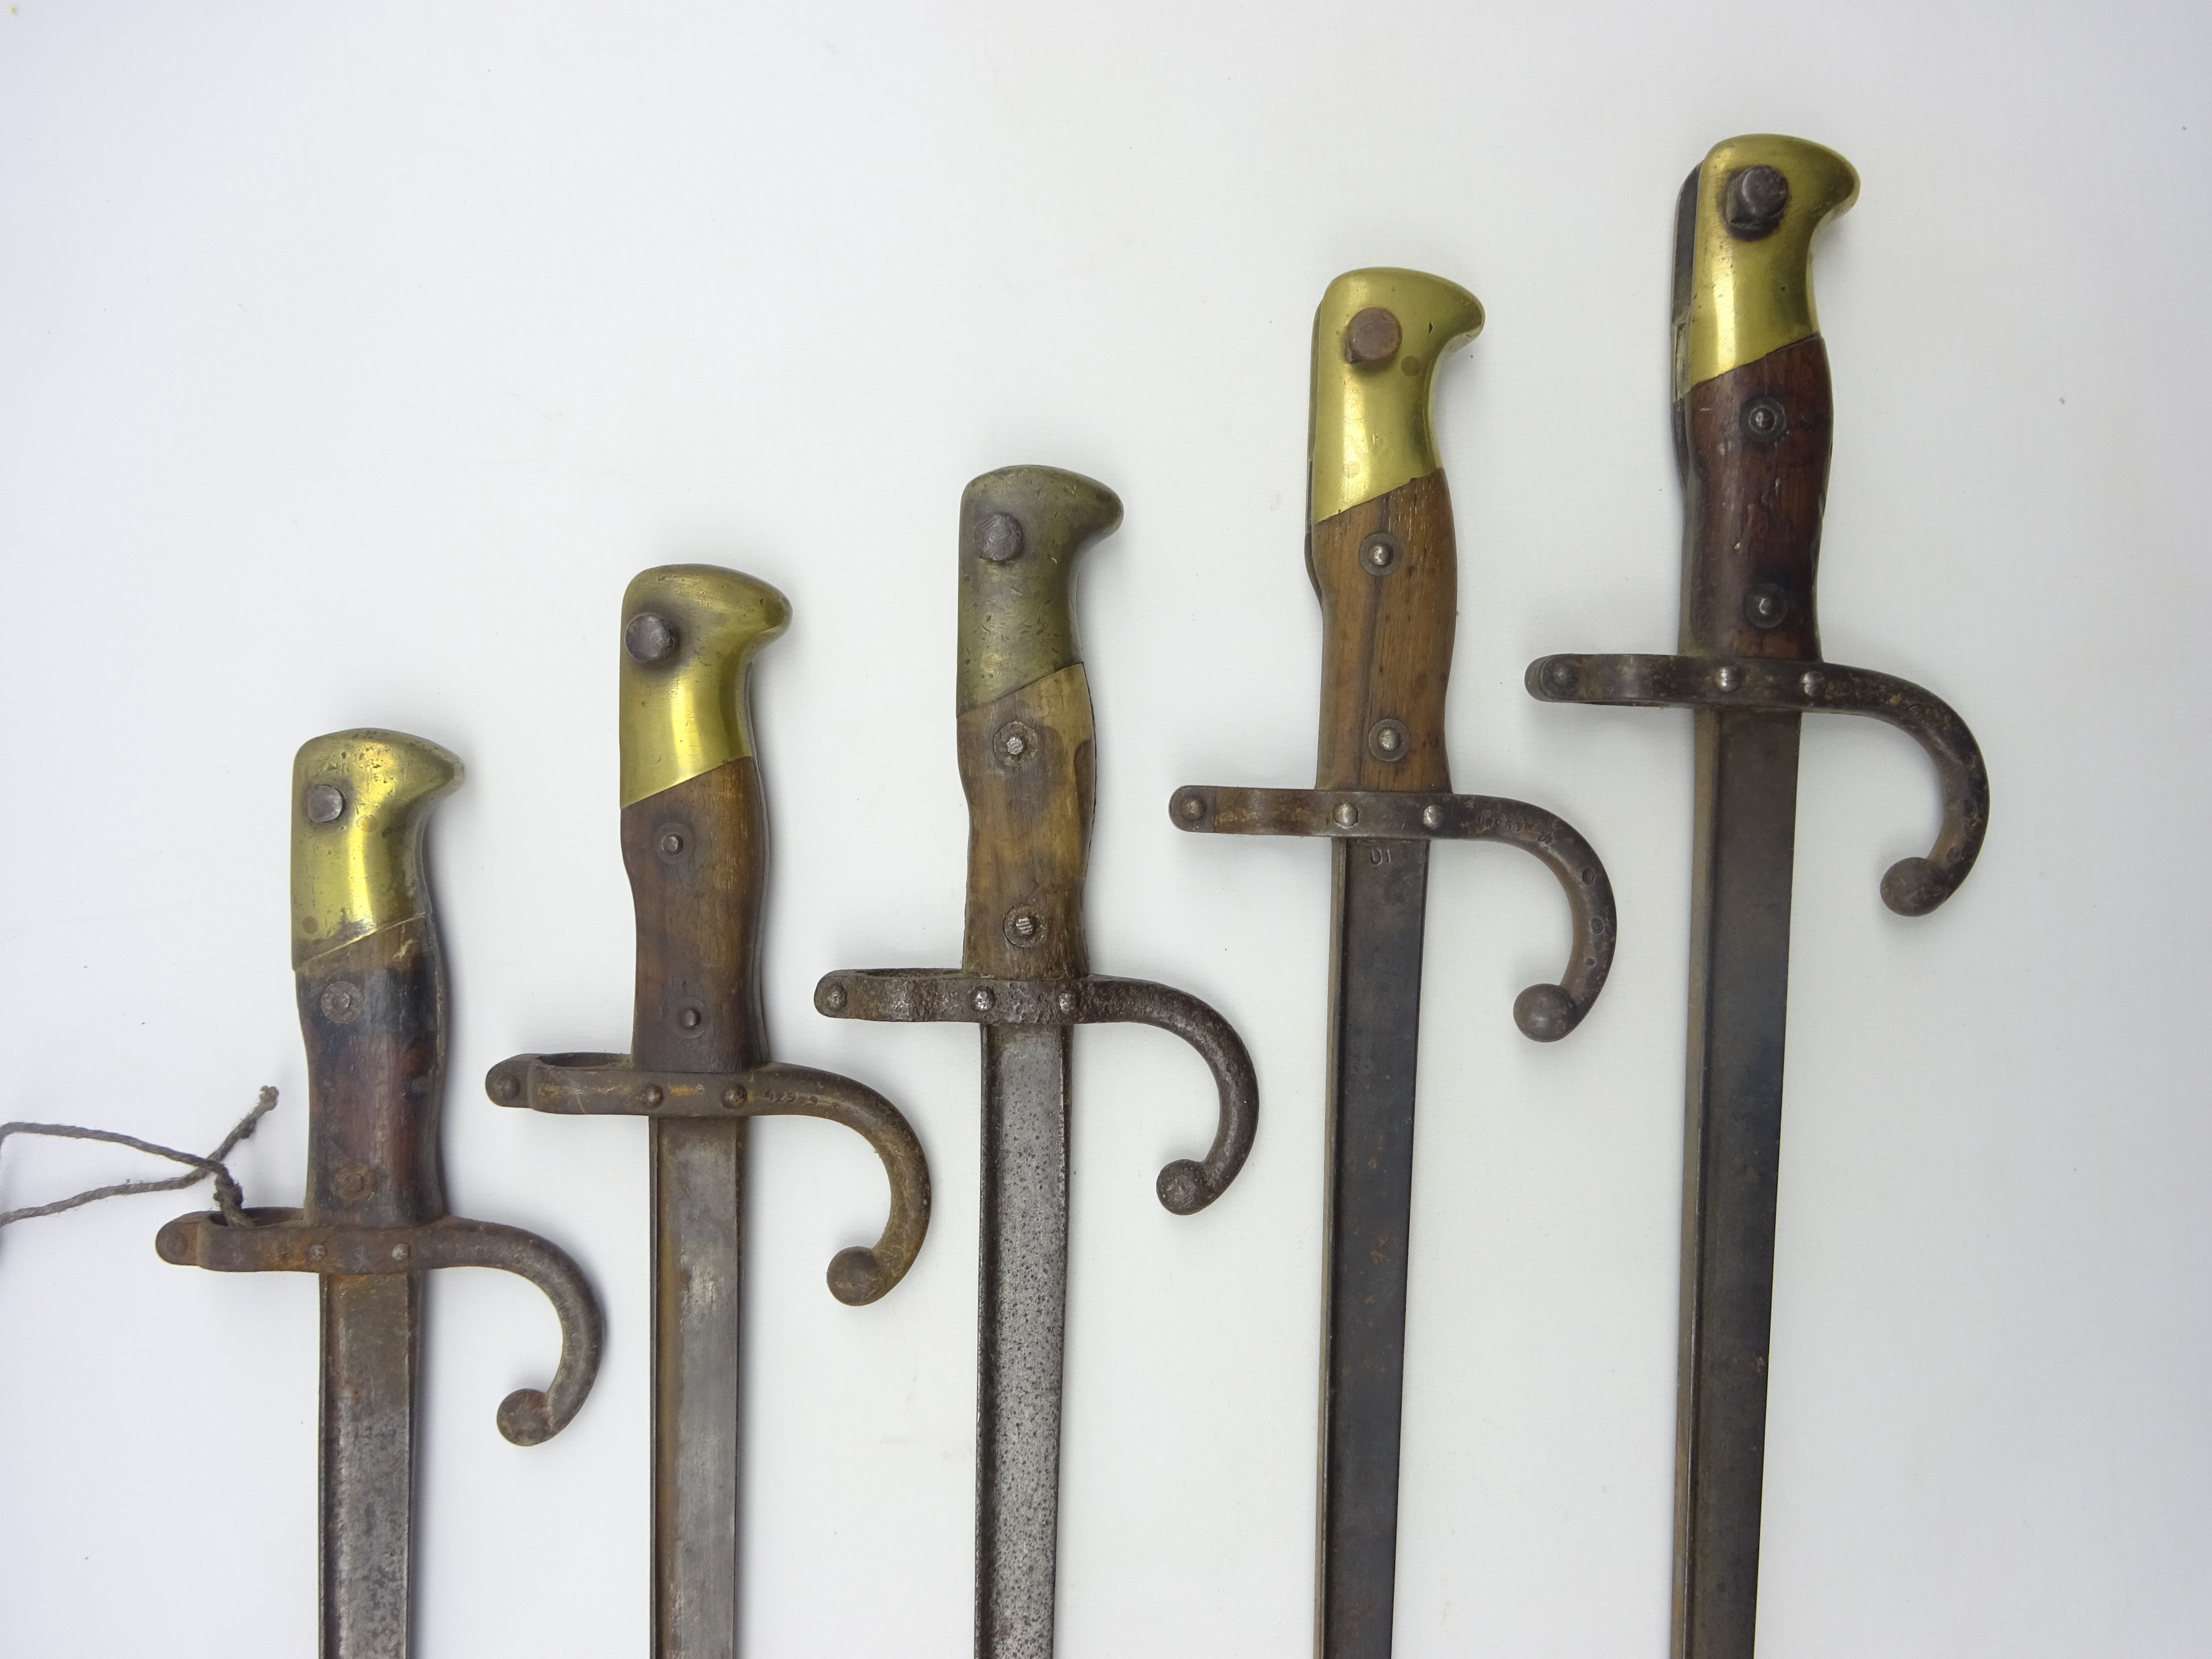 Five French Model 1874 Epee bayonets, various armouries including St. - Image 3 of 4